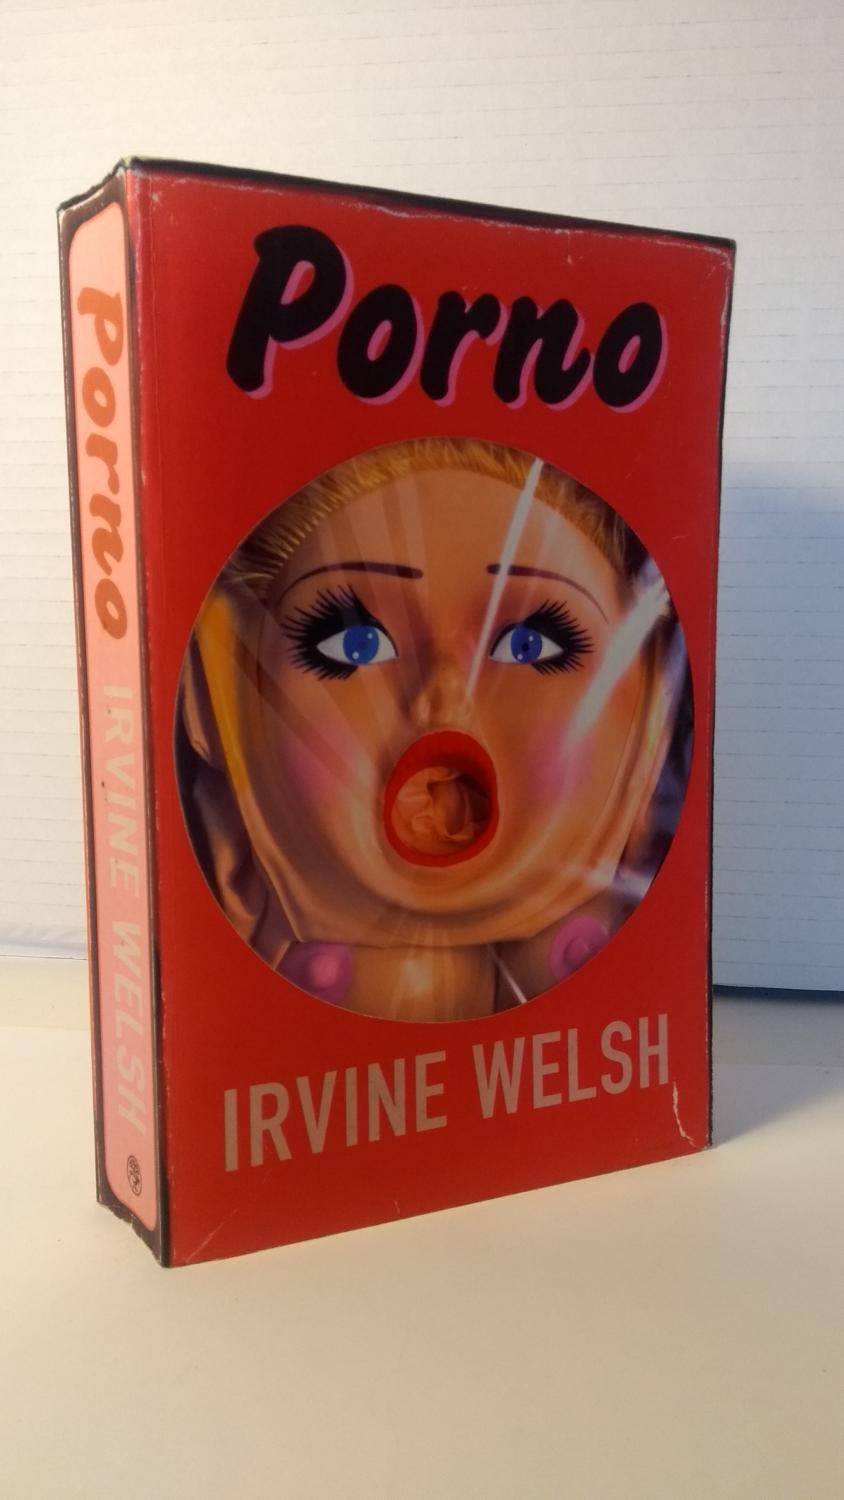 best of Welsh Porno by irvine